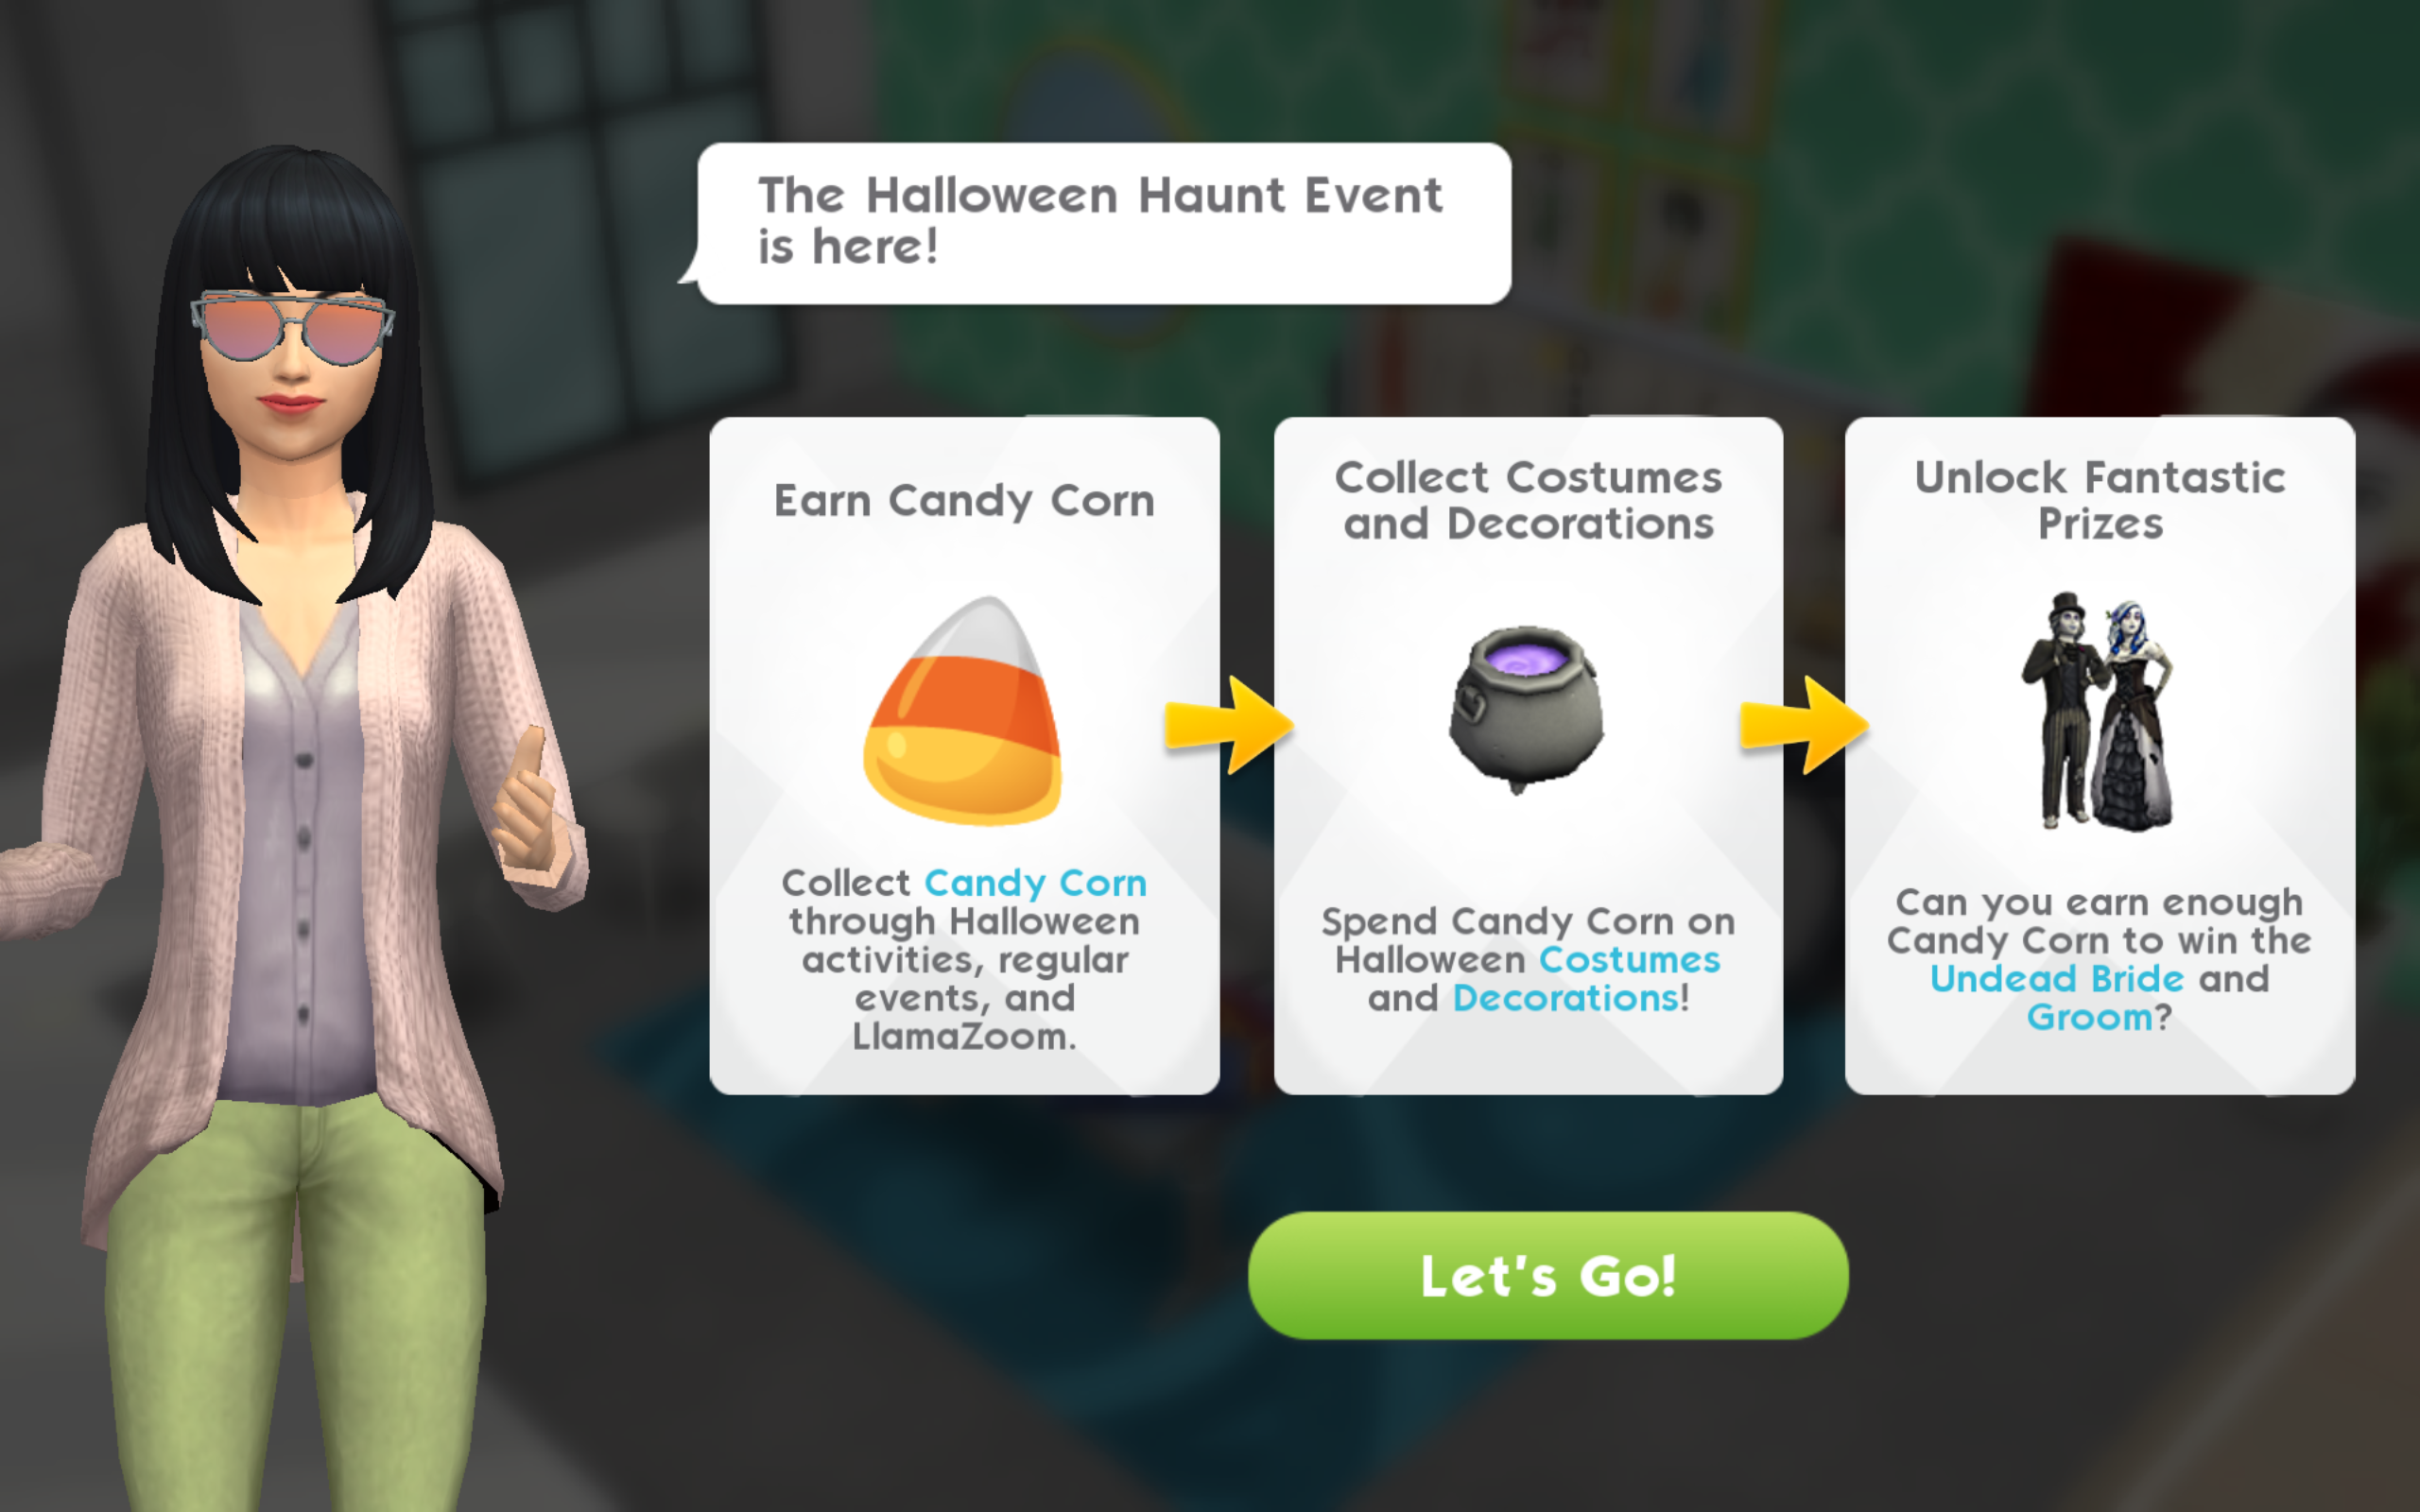 How to Complete the “Trick or Treat” Halloween Event in The Sims